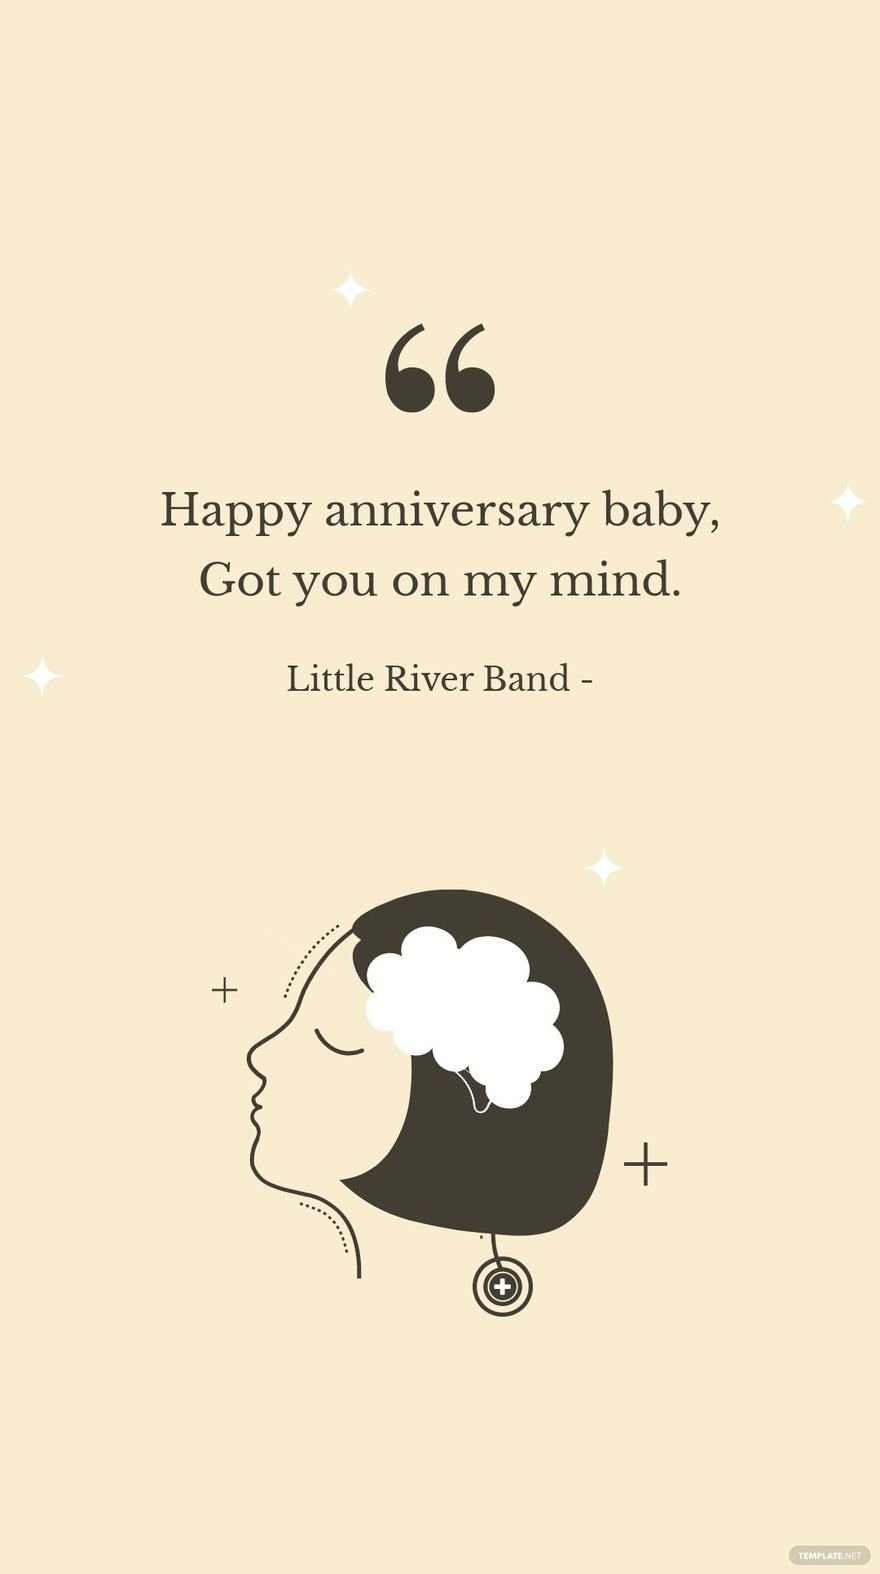 Little River Band - Happy anniversary baby, Got you on my mind.